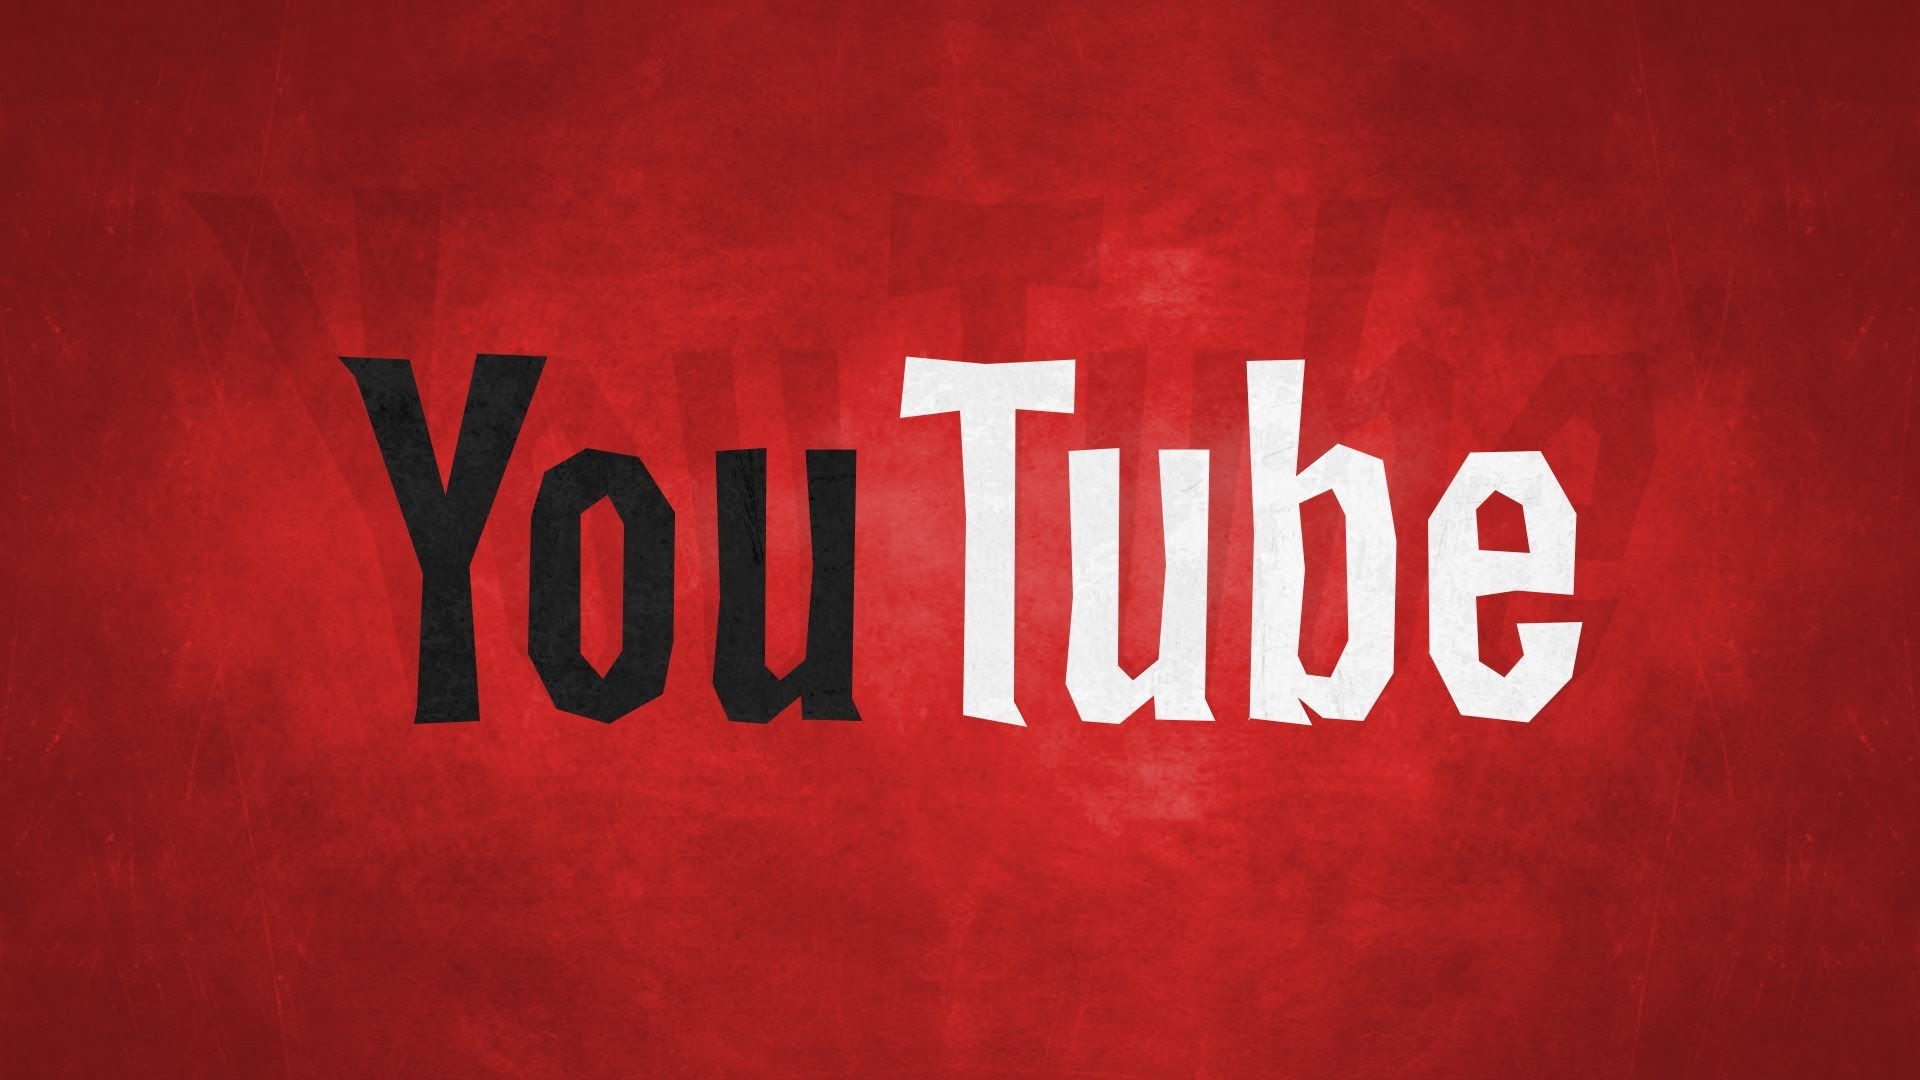 YouTube: A website owned by Google LLC where users can upload their own videos. 1920x1080 Full HD Background.